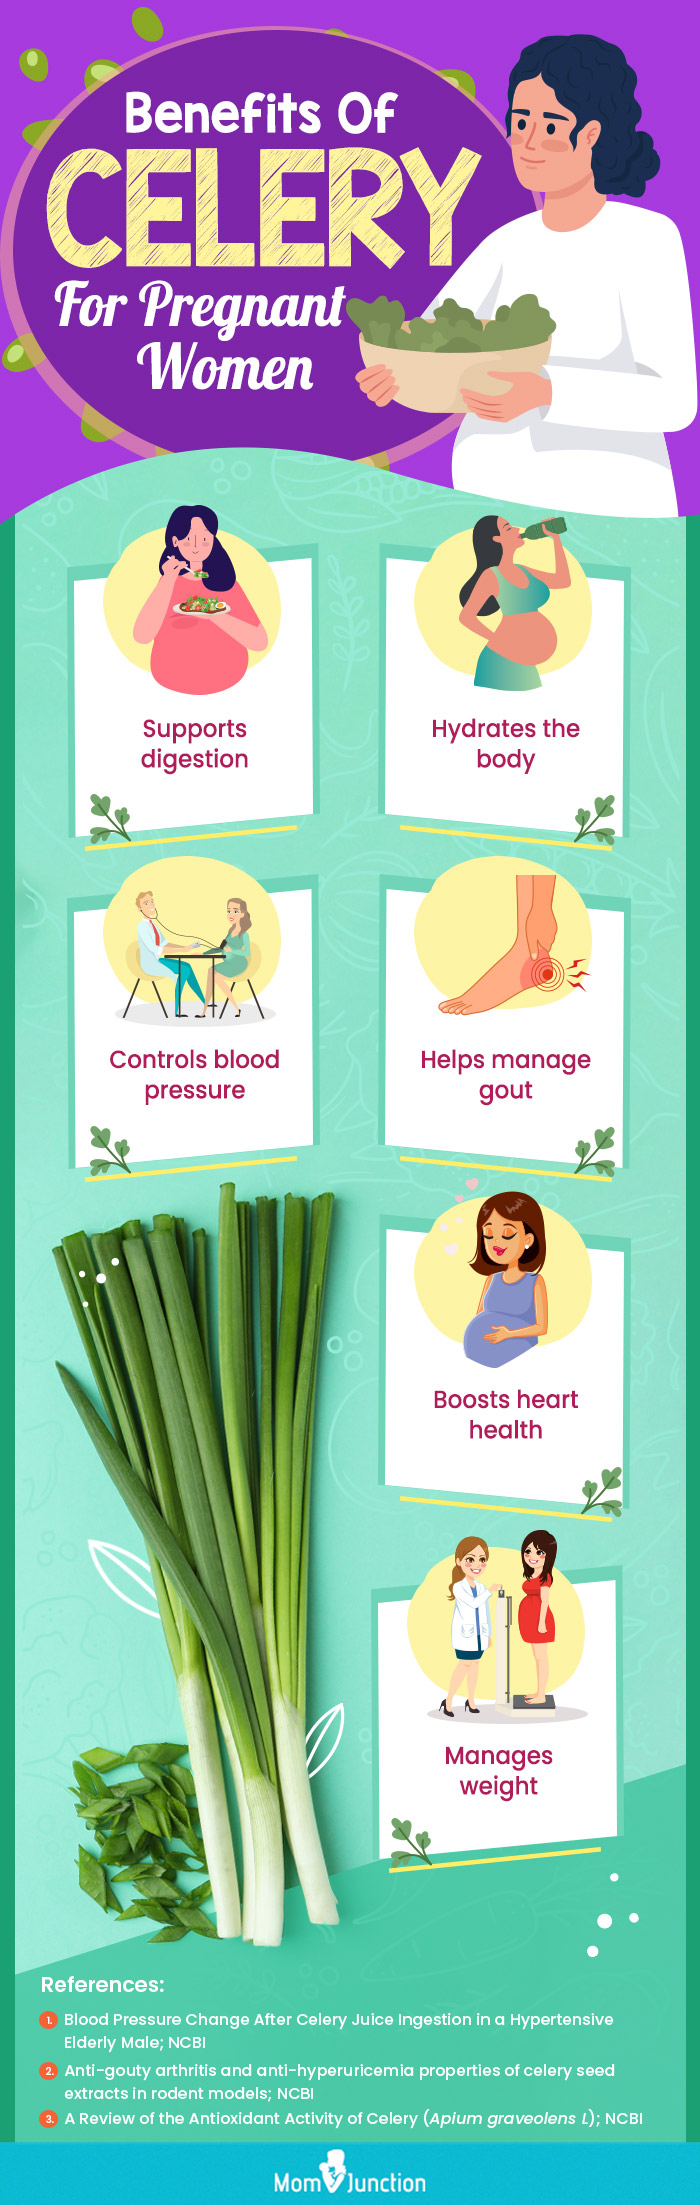 benefits of celery for pregnant women(infographic)